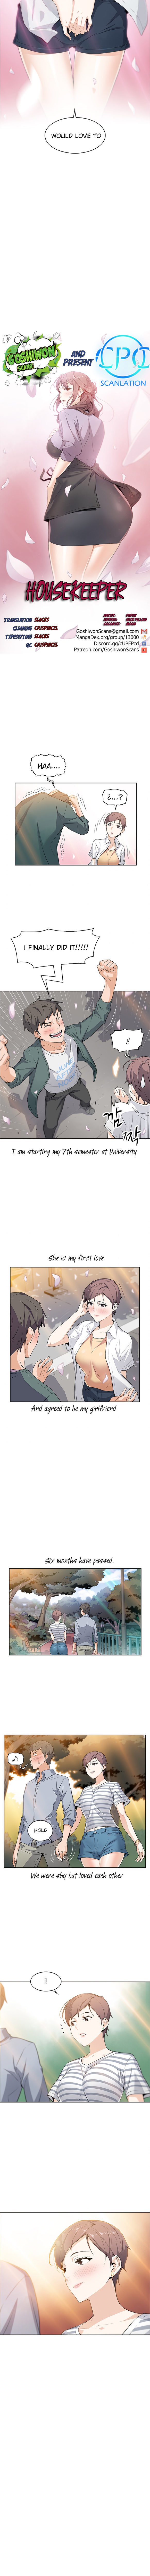 Housekeeper Manhwa - Chapter 1 Page 2